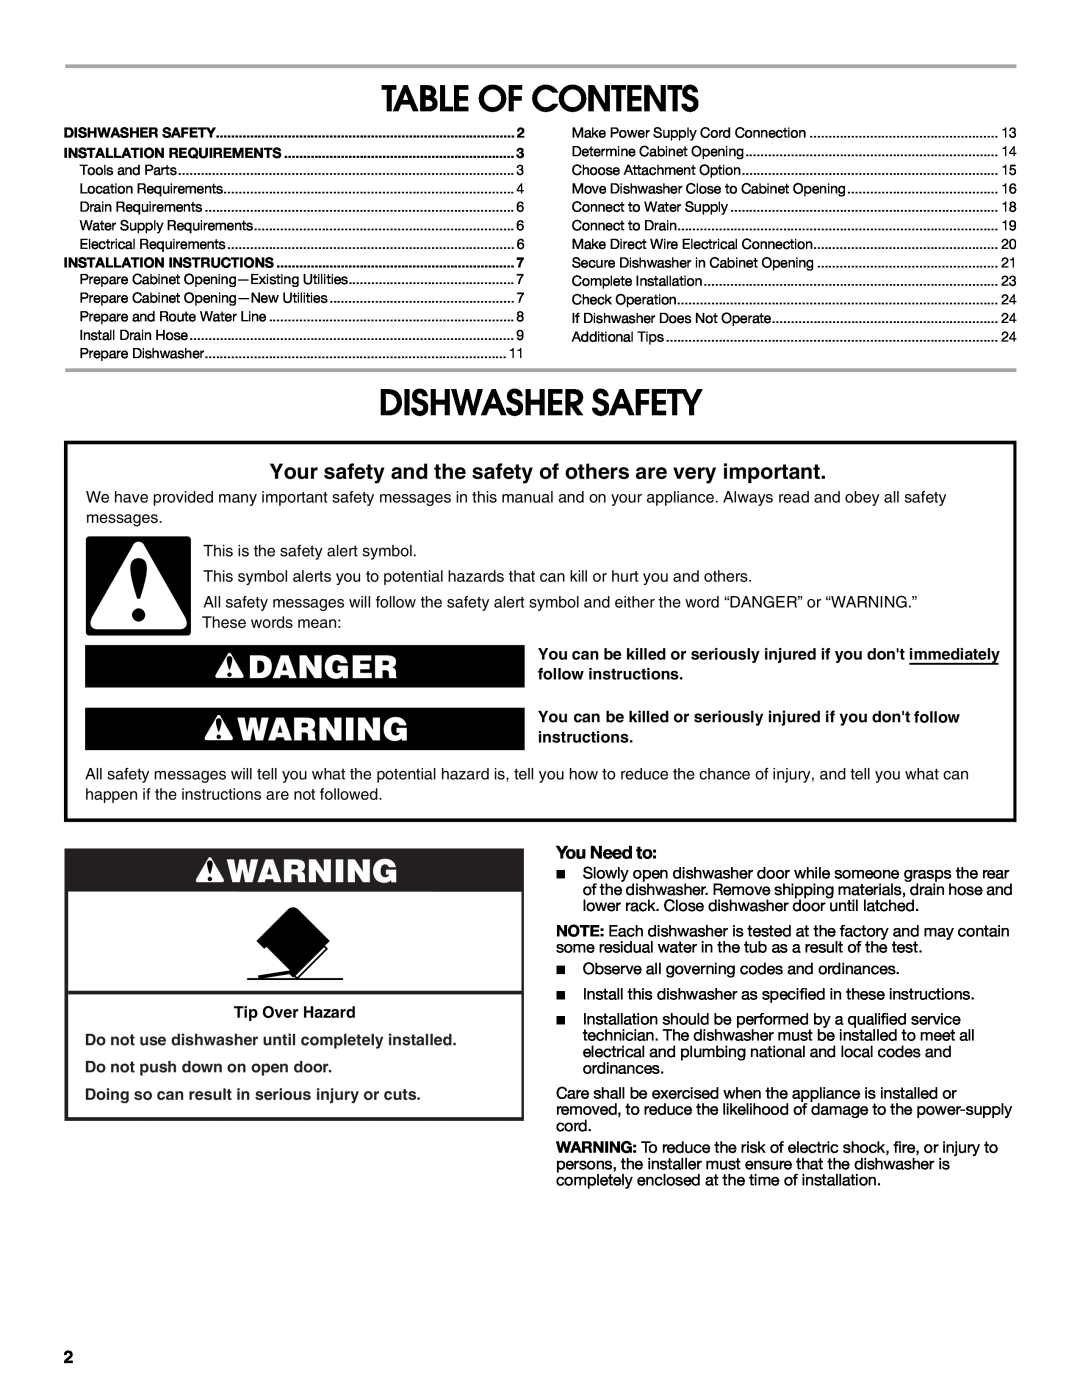 Maytag W10401504D Table Of Contents, Dishwasher Safety, Danger, Your safety and the safety of others are very important 